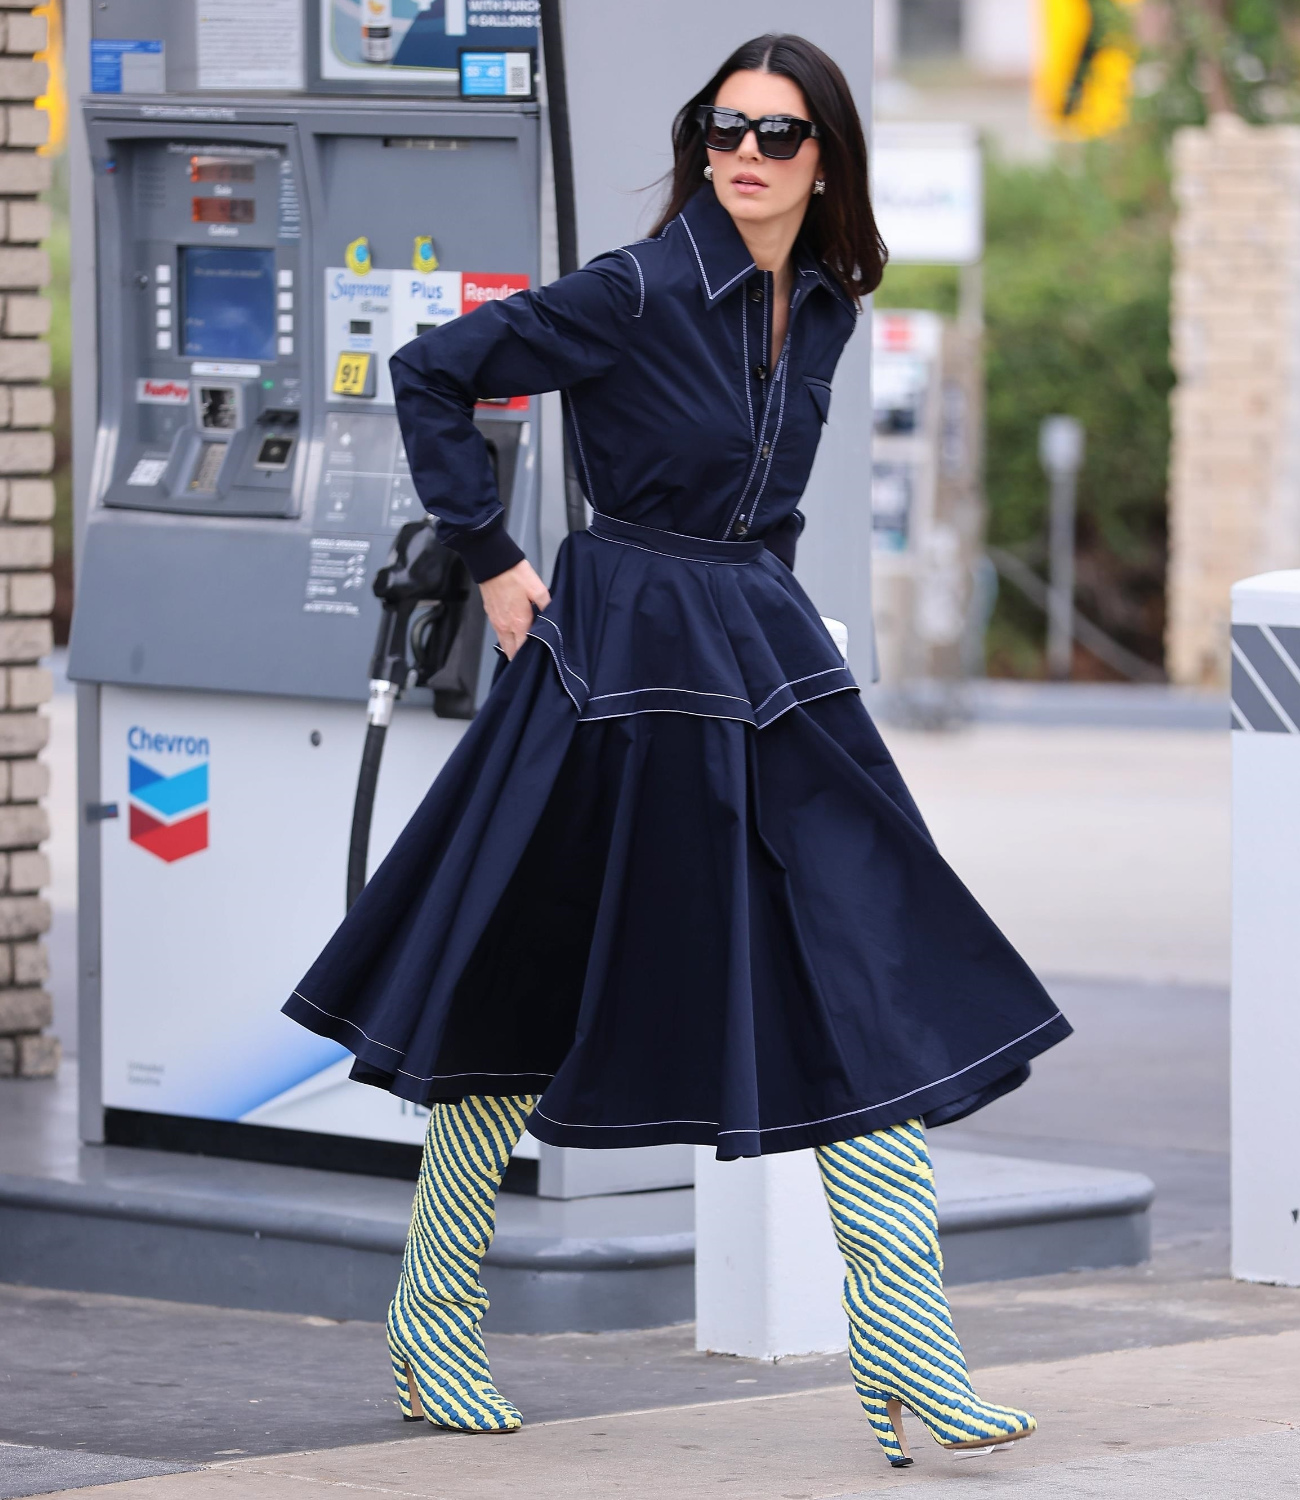 Kendall Jenner's Gas Station Outfit Is Simply Glorious